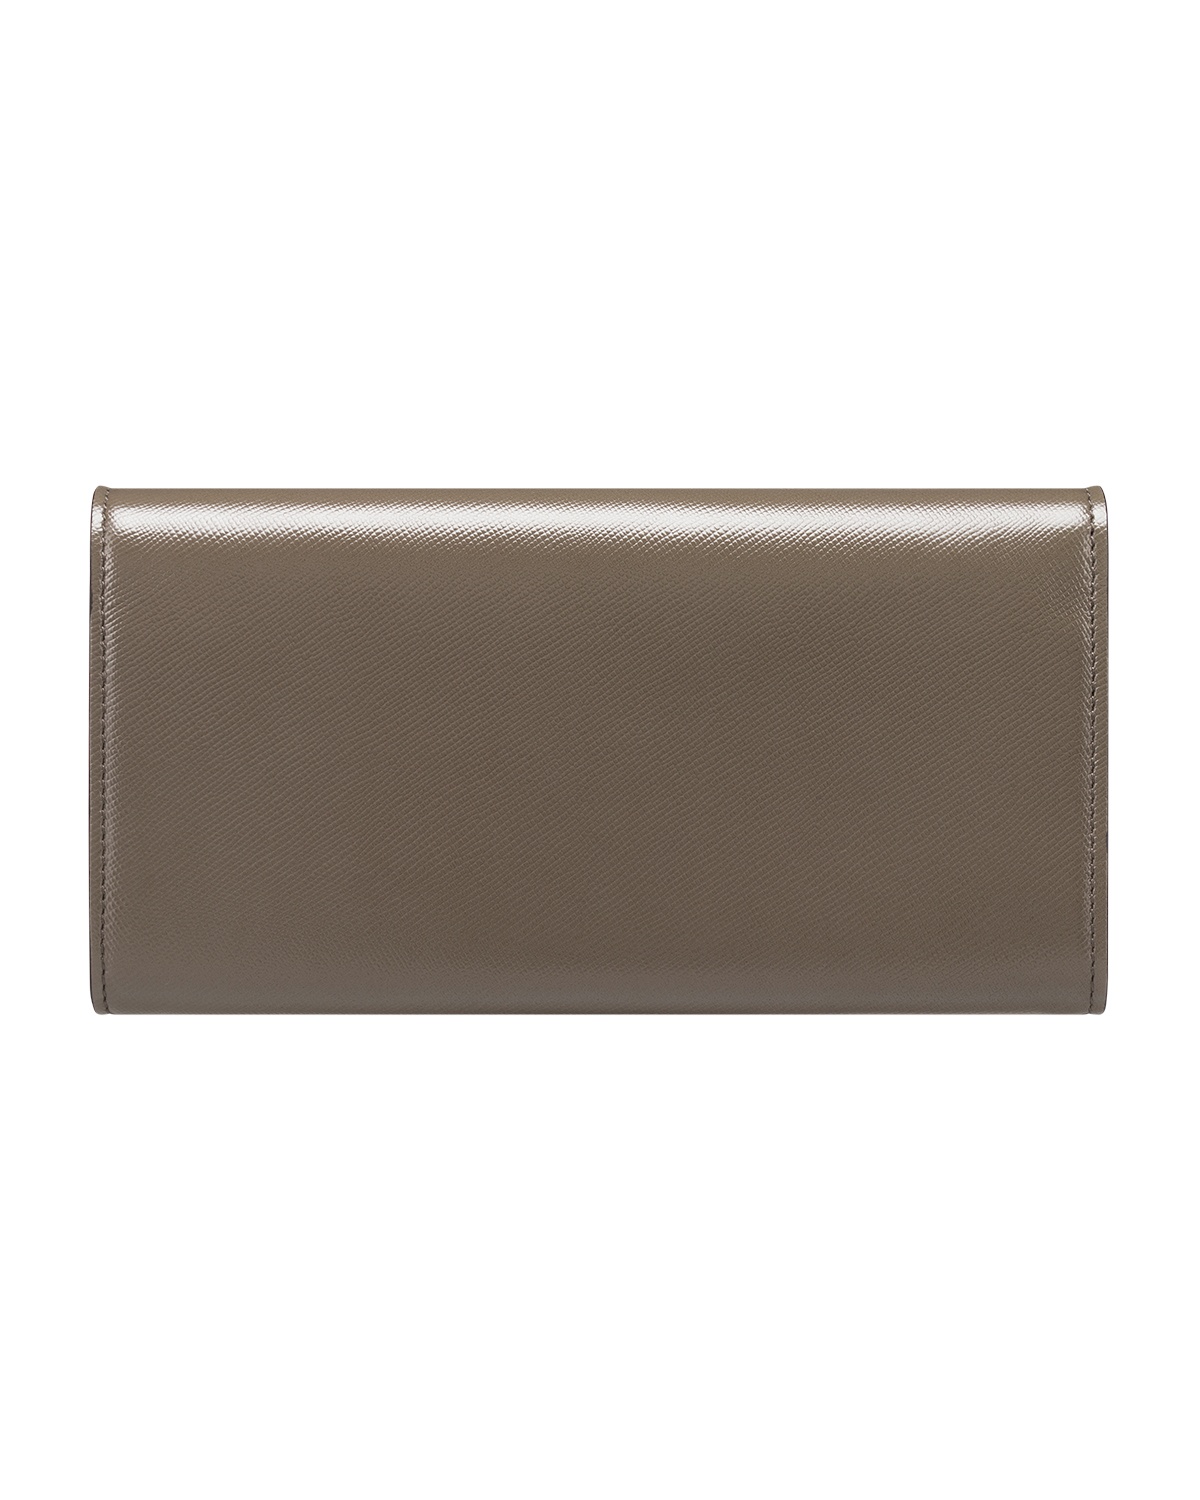 TAUPE CONTINENTAL WALLET - 4